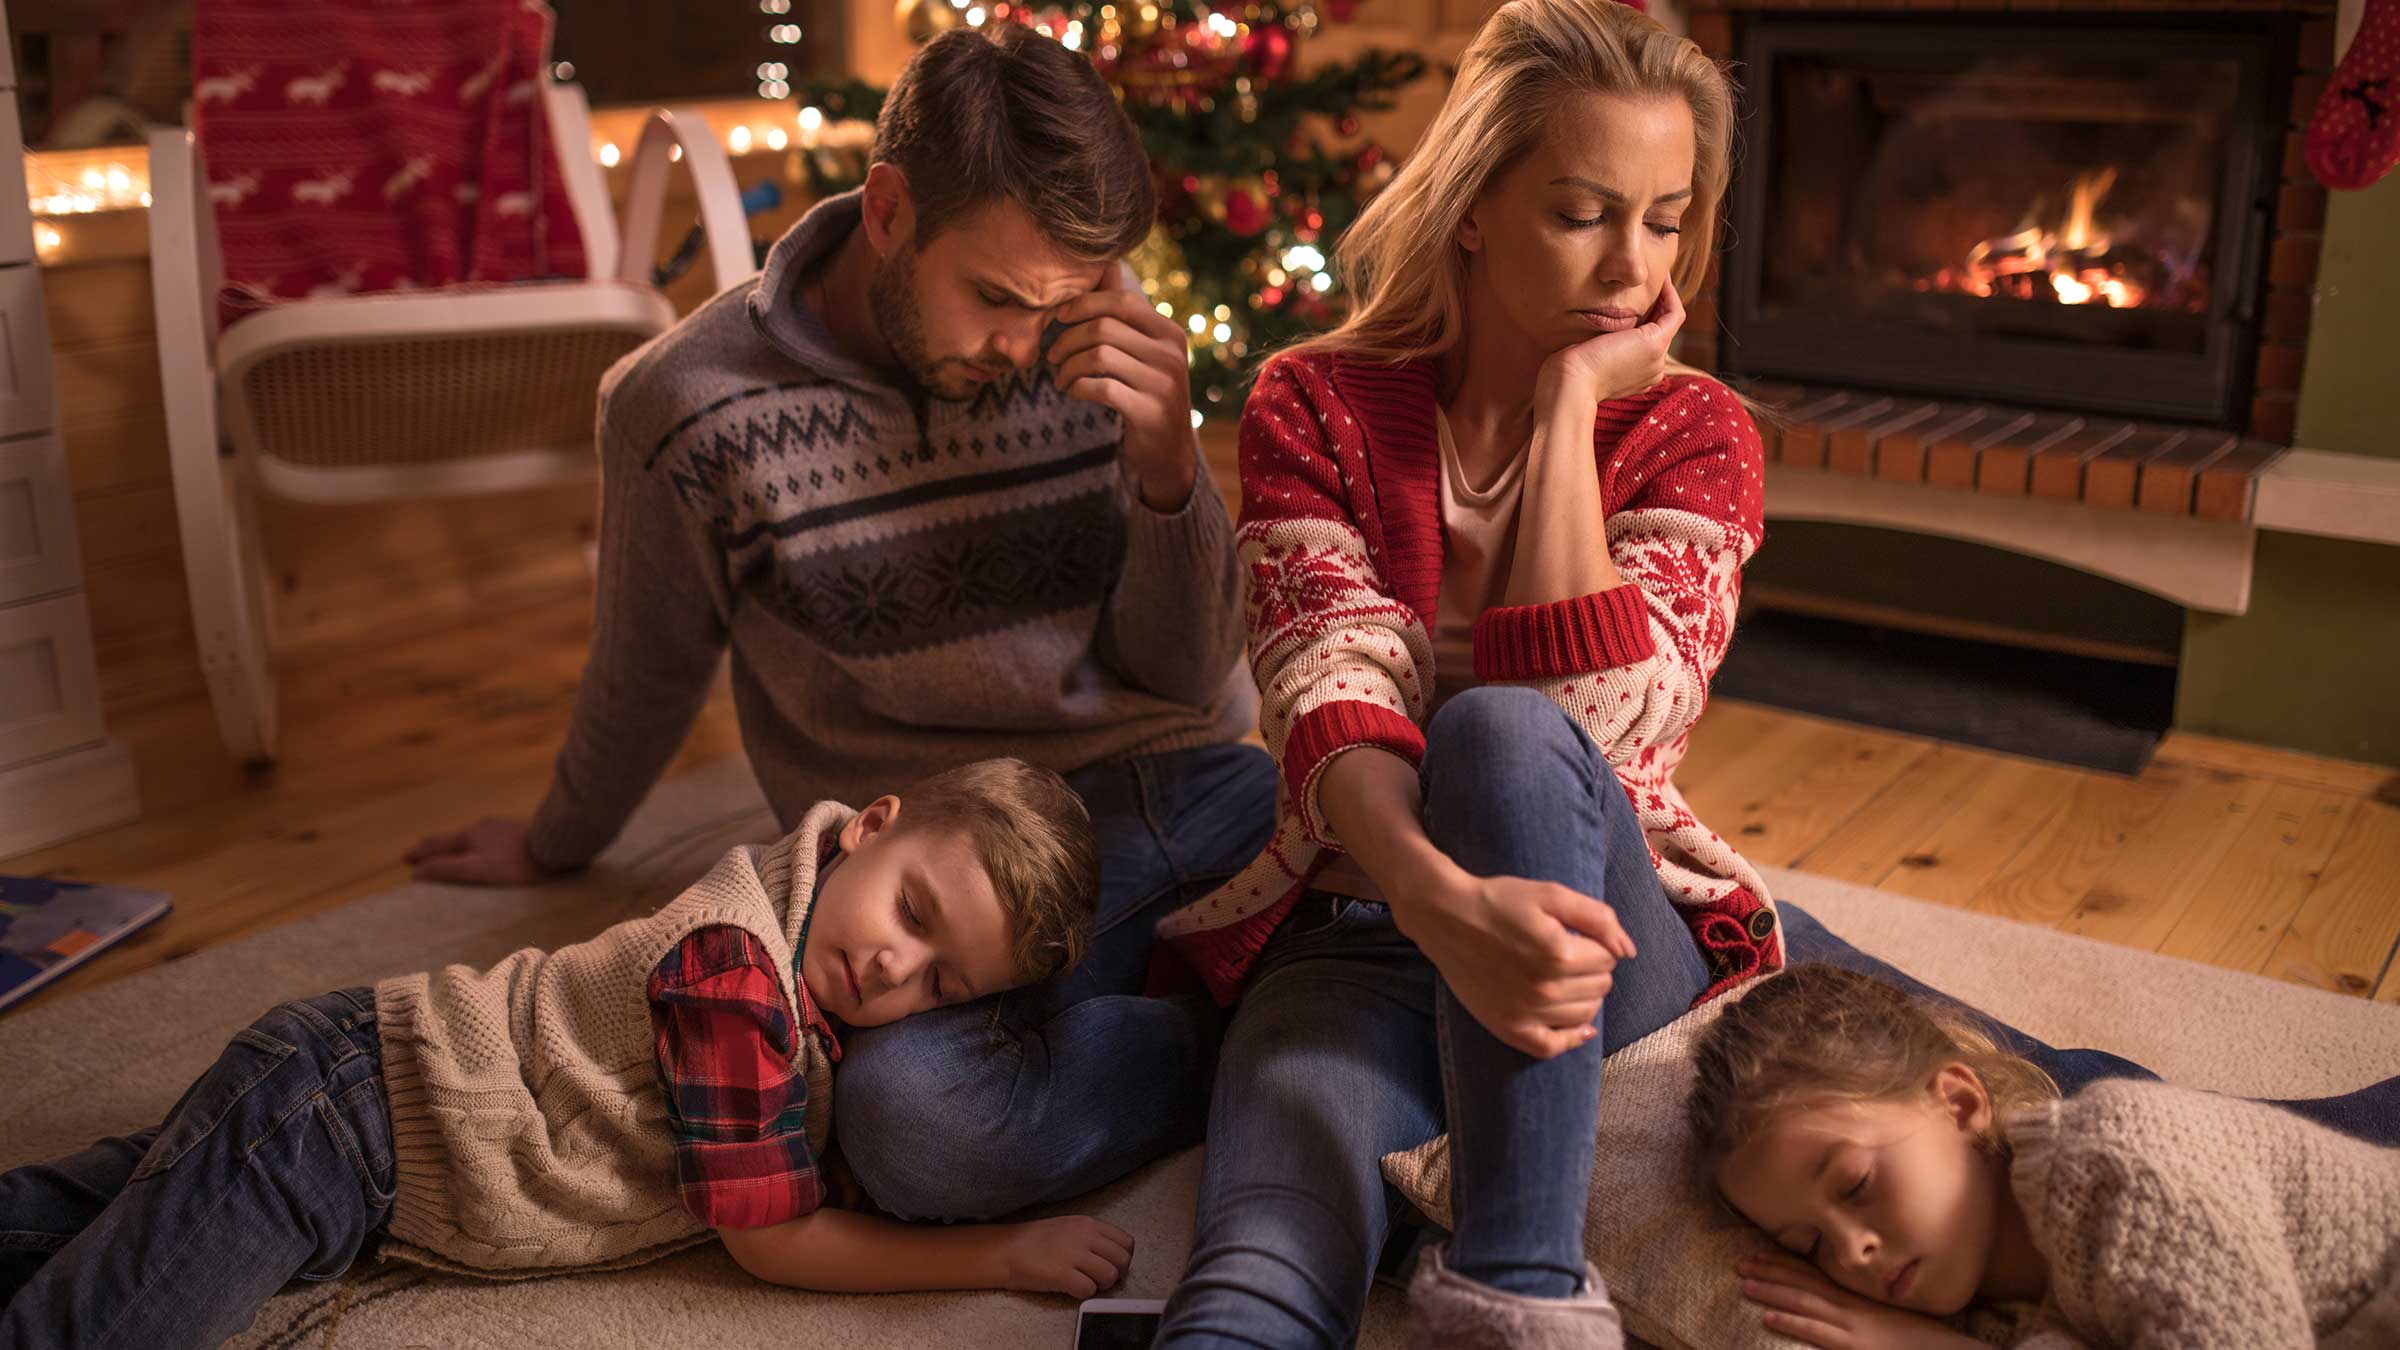 Parents appear annoyed at each other while two kids sleep at their feet in living room with holiday tree. 